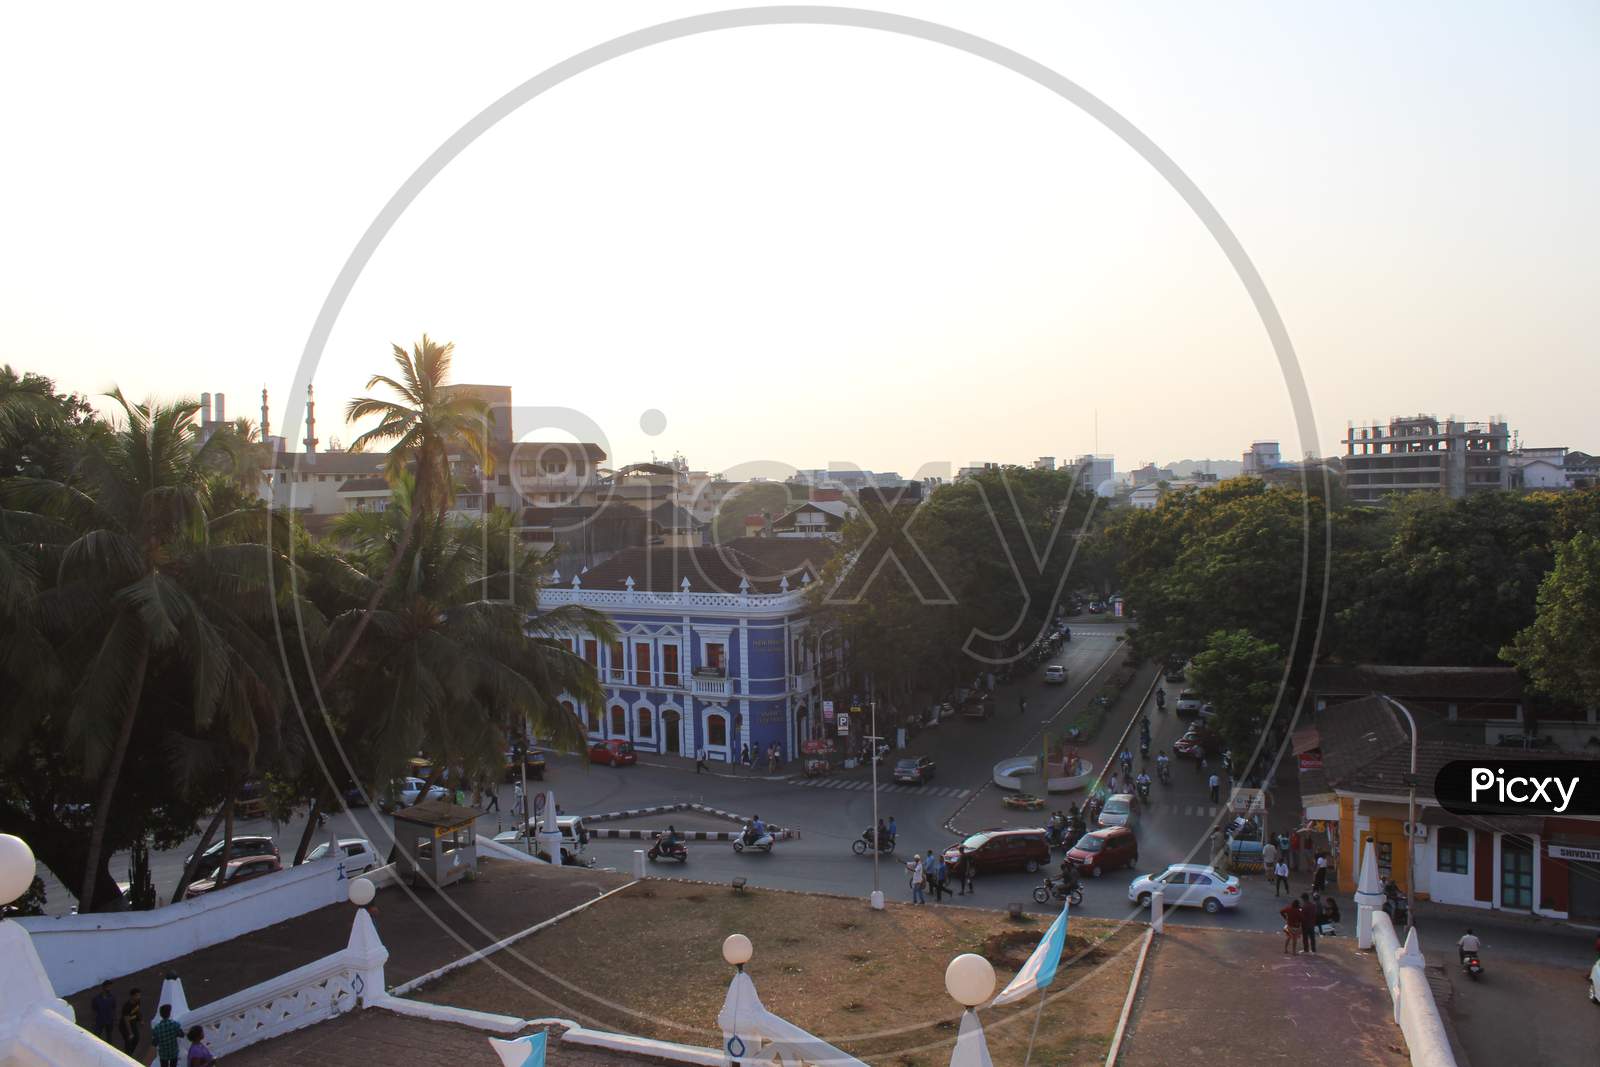 view of Panjim, Goa, as seen from The Our Lady of the Immaculate Conception Church